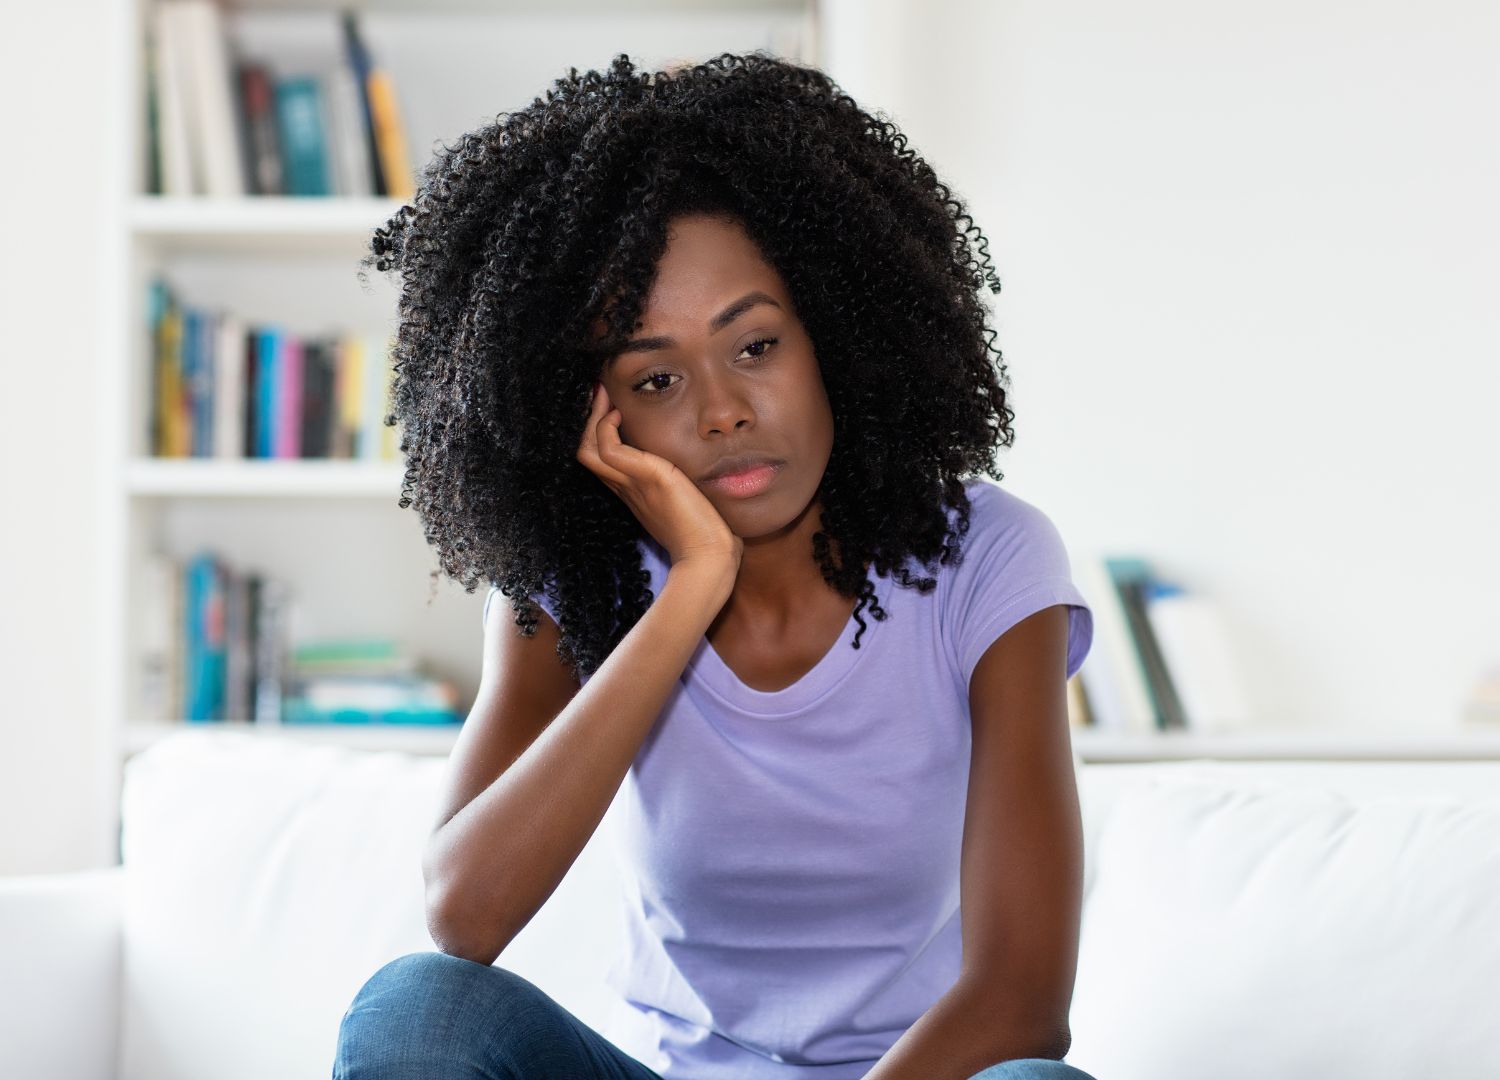 Menorrhagia: The Time of the Month I Dread So Much